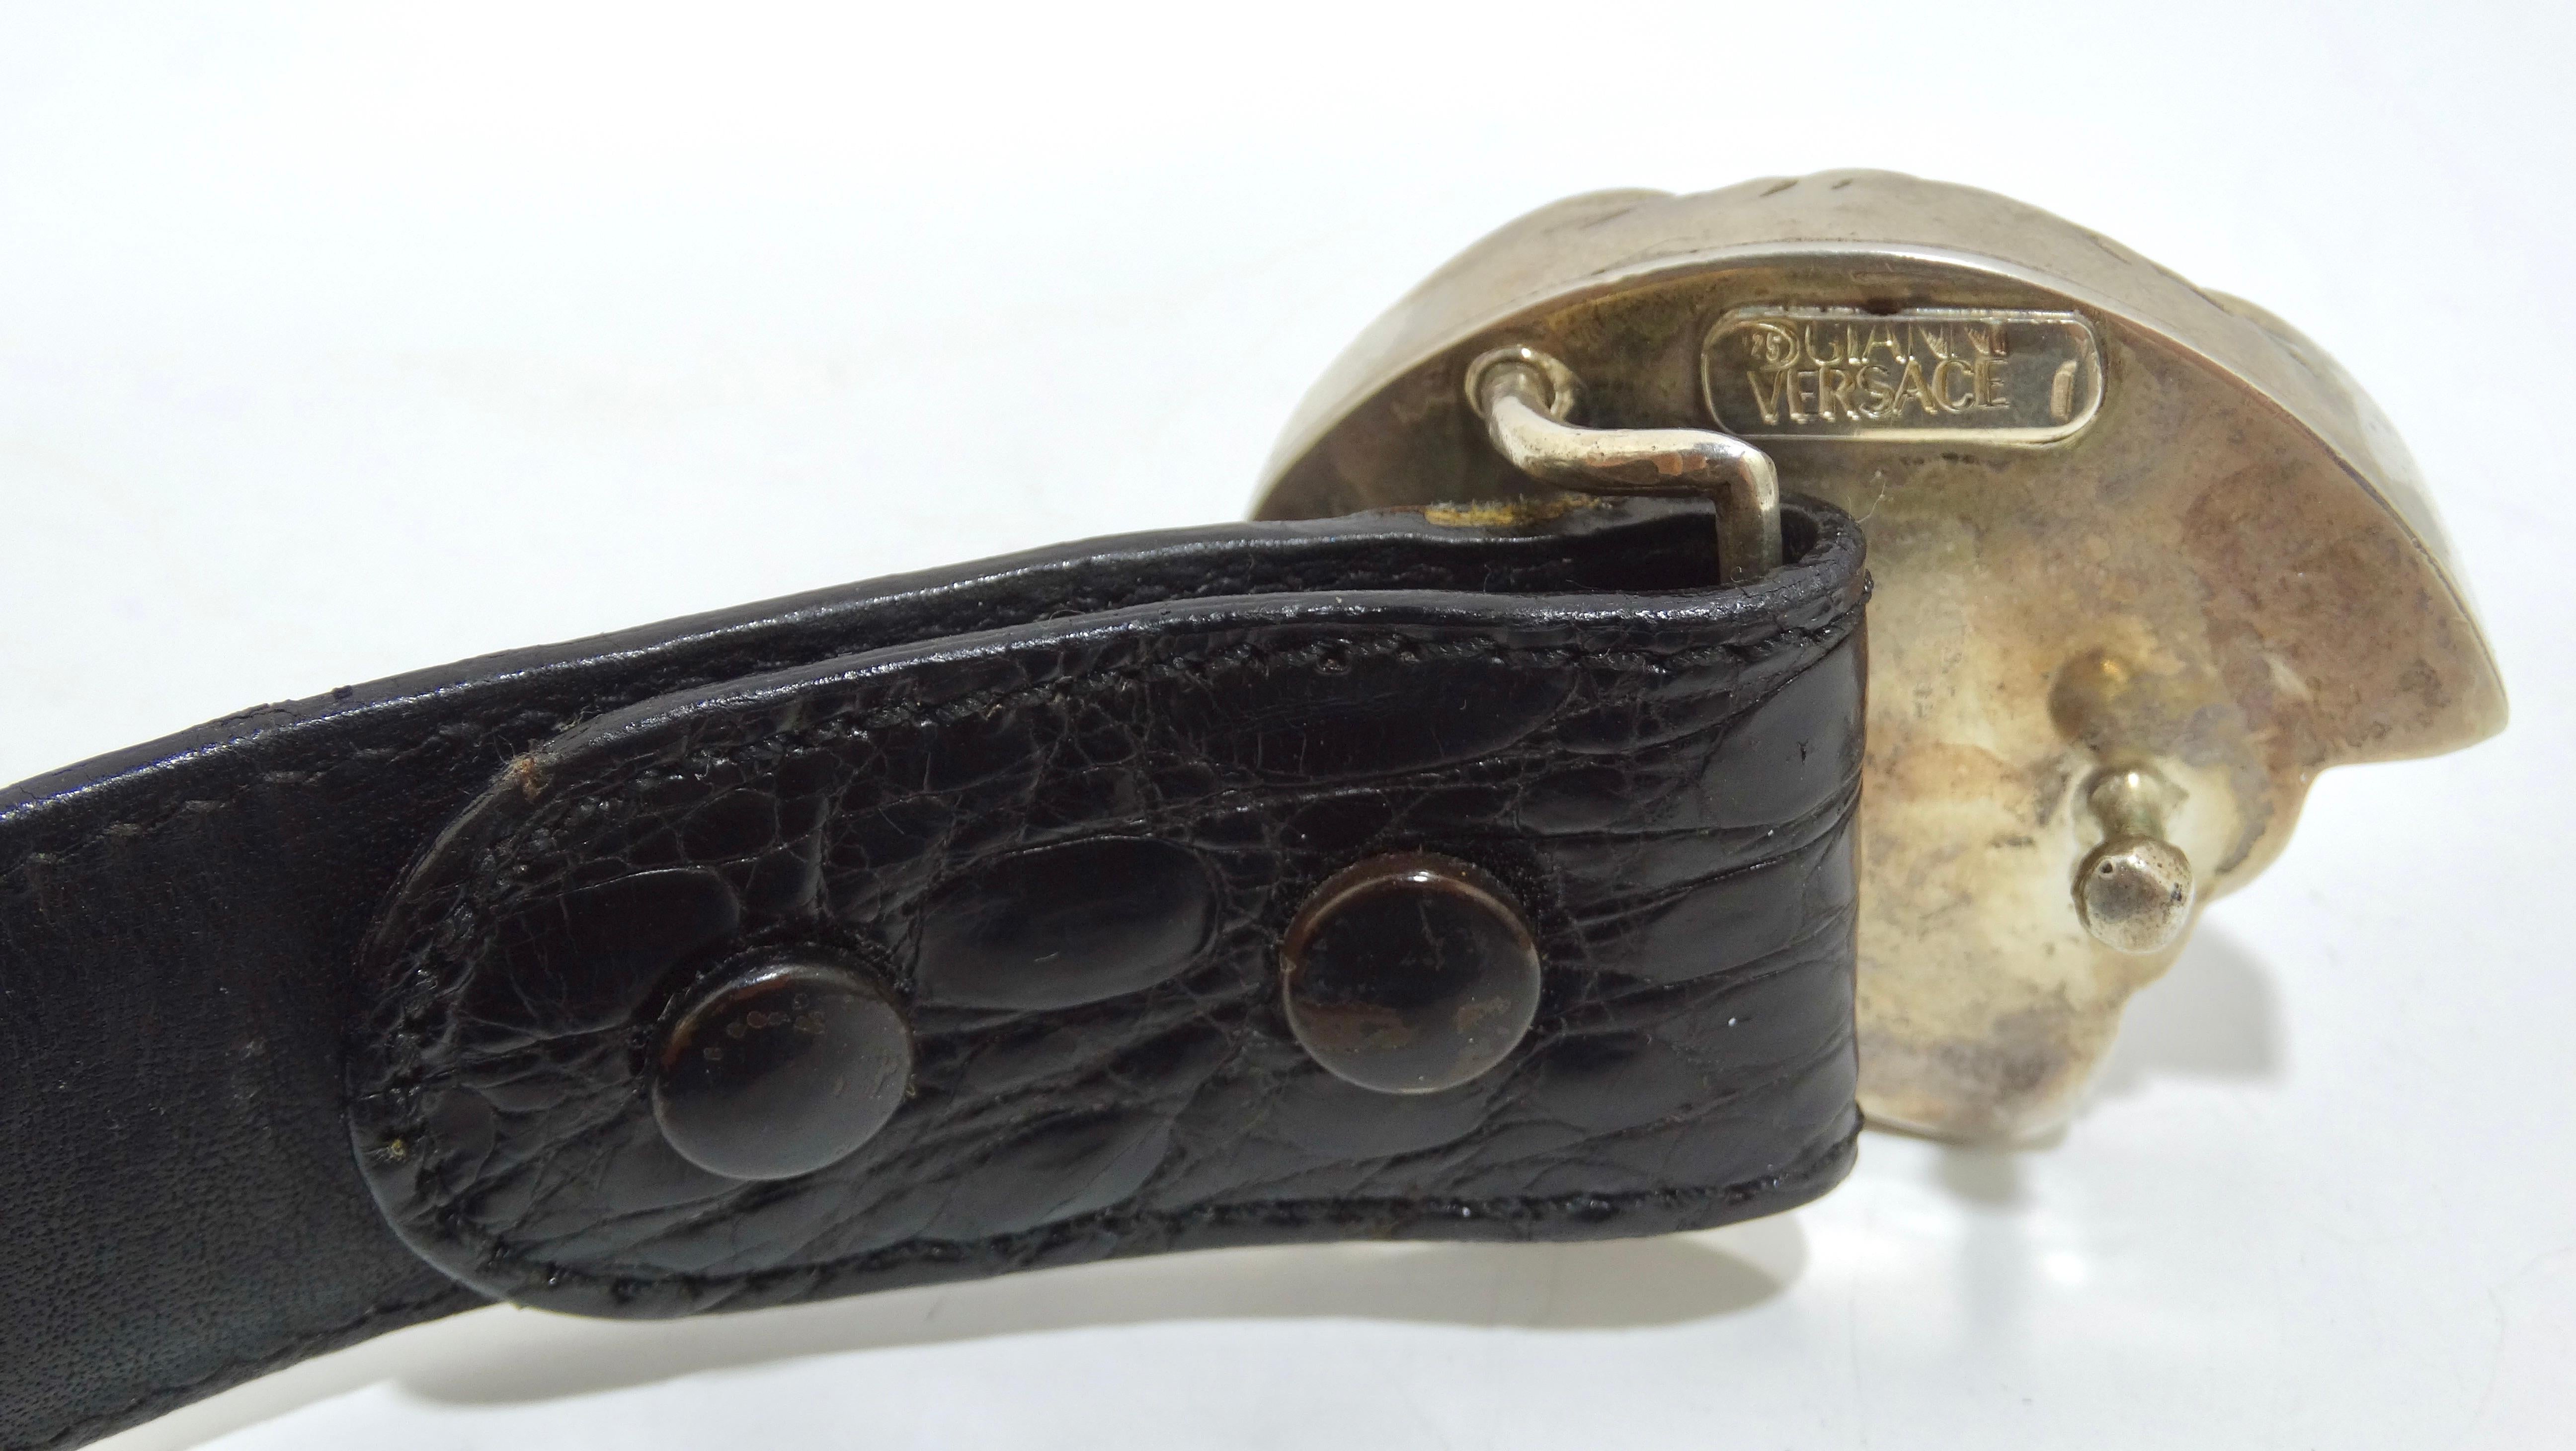 Gianni Versace Silver-Toned Medusa Leather Belt For Sale 2